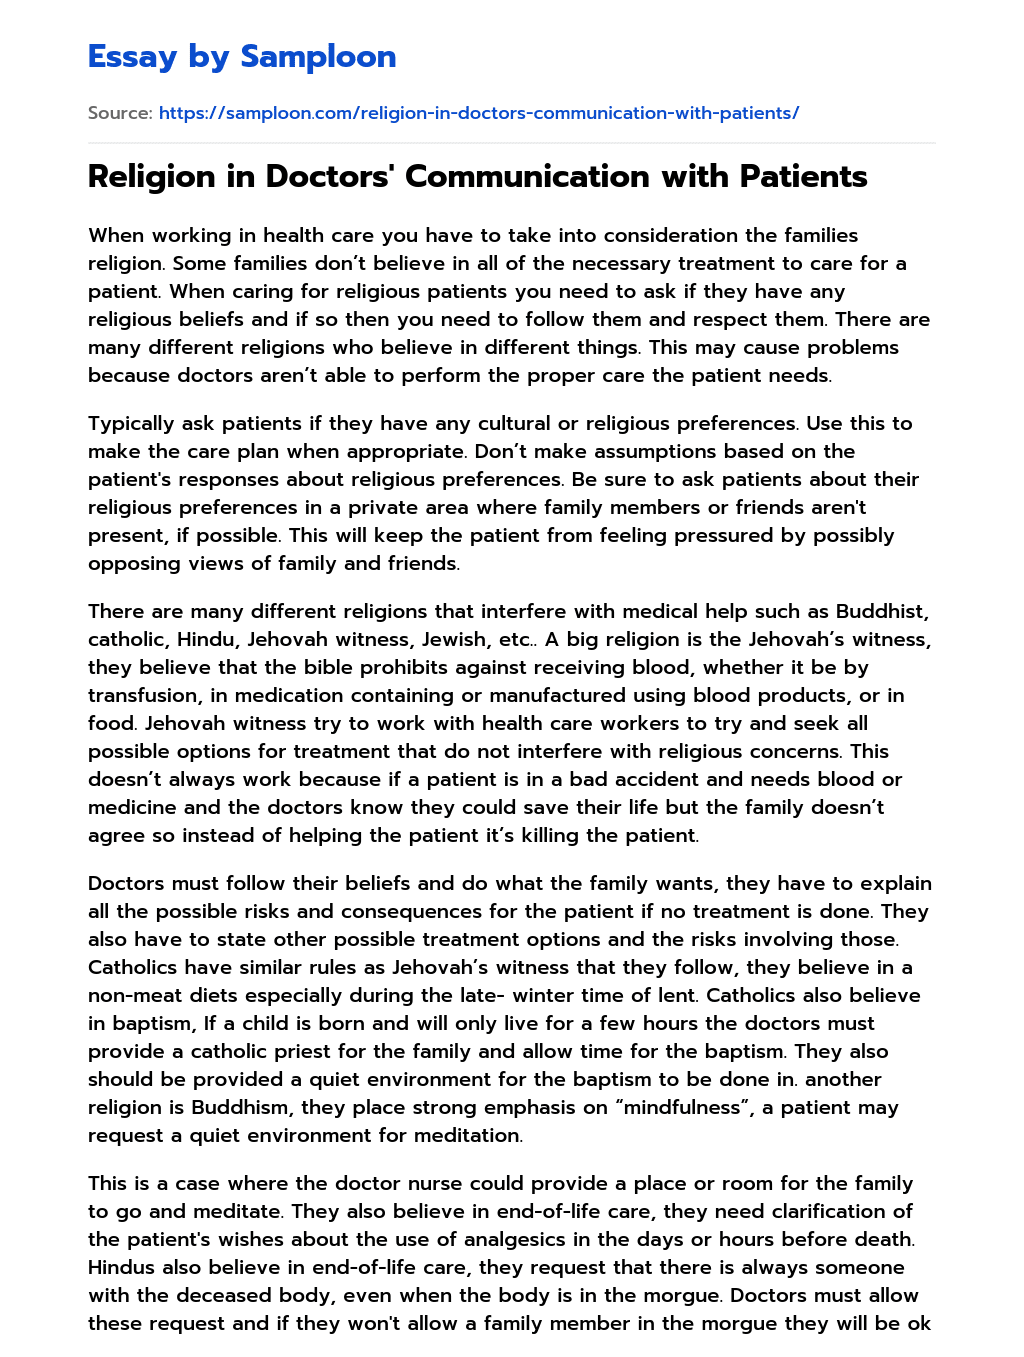 Religion in Doctors’ Communication with Patients essay